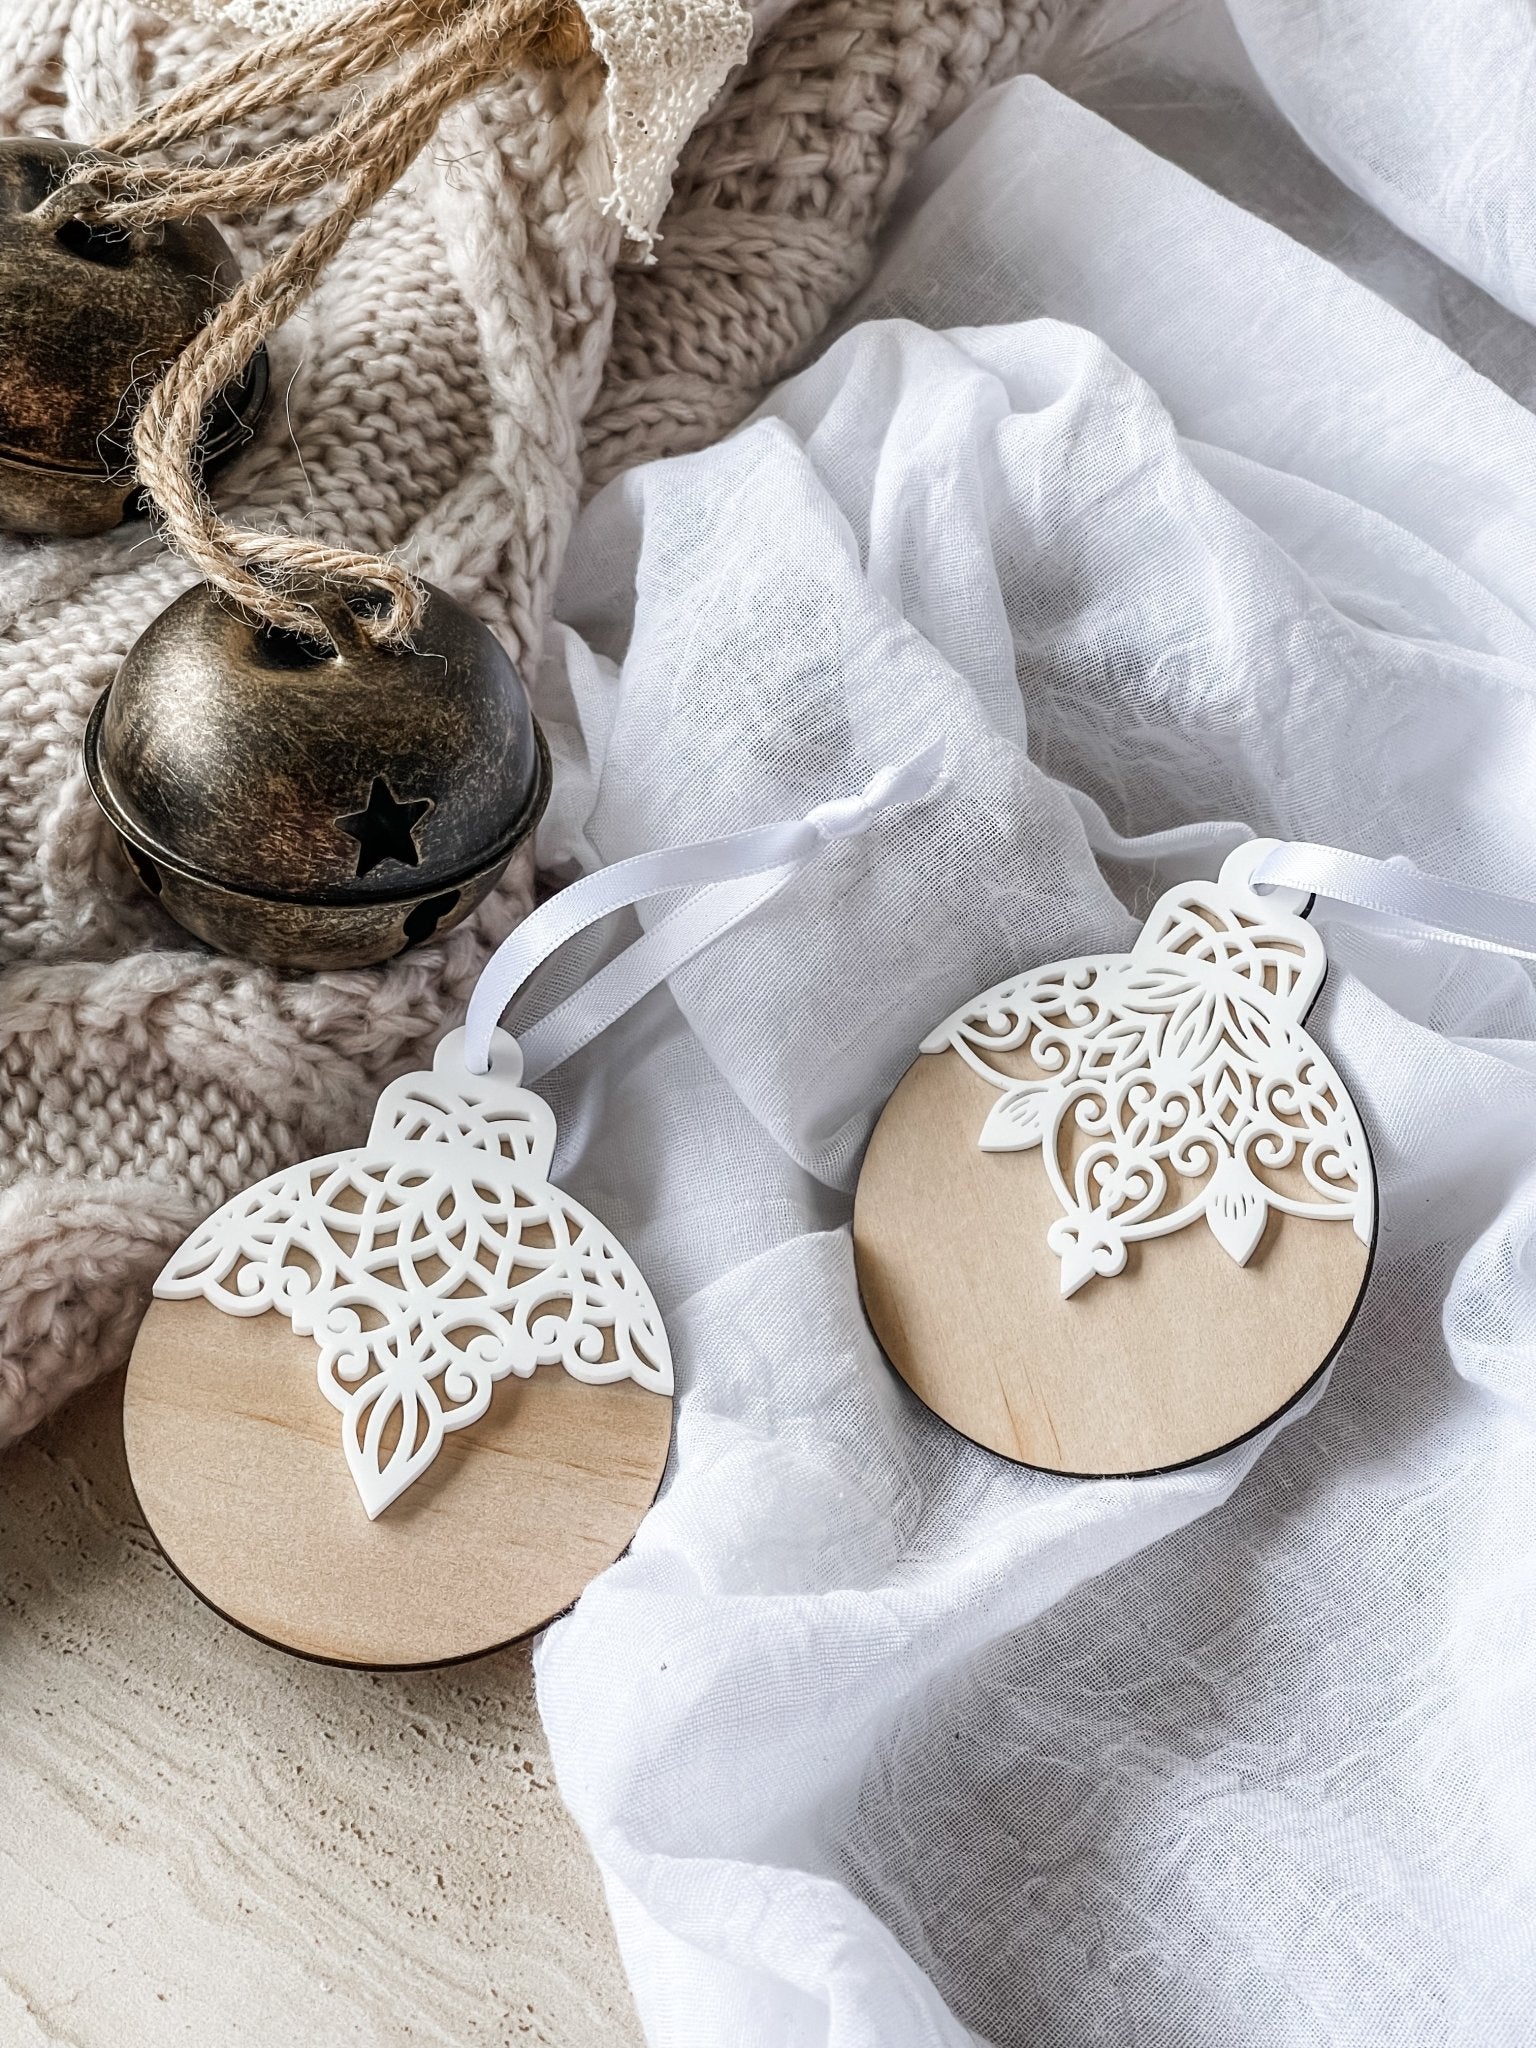 Layered Lace Look Ornament - Wooden Base - The Humble Gift Co.